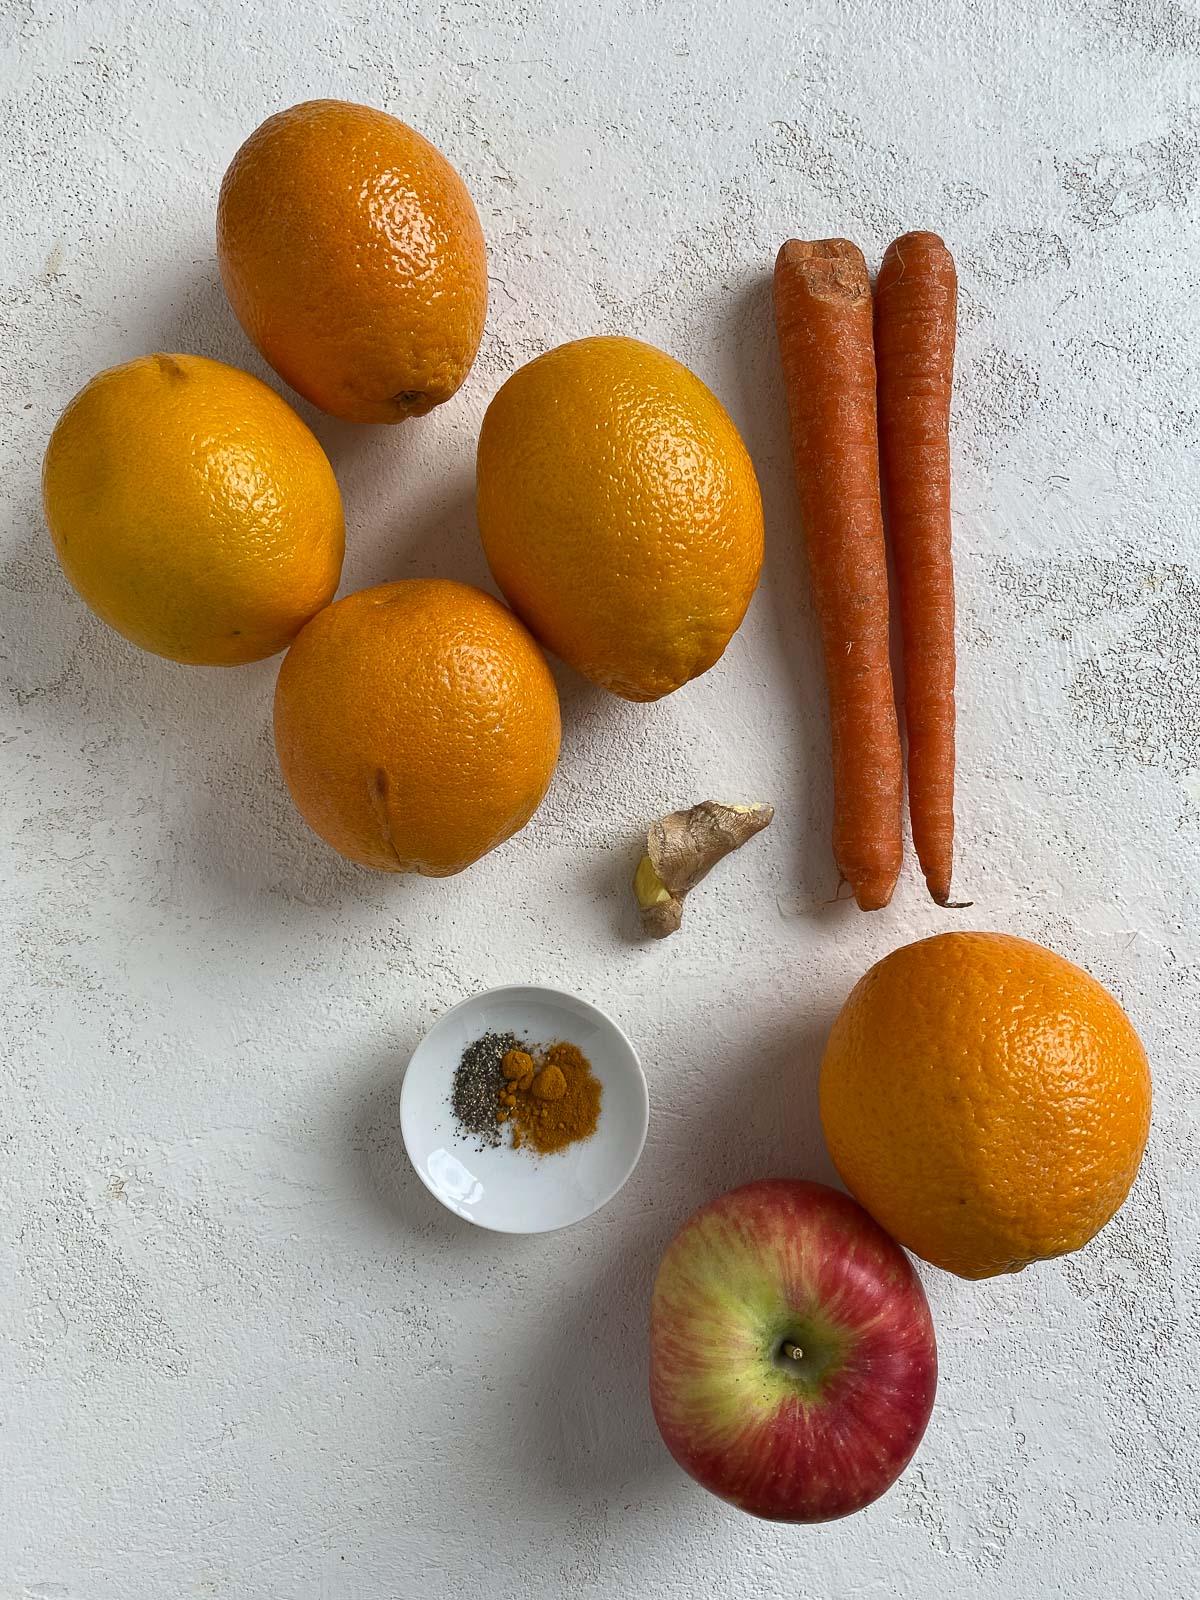 ingredients for Immunity Boosting Juice spread out on a white surface